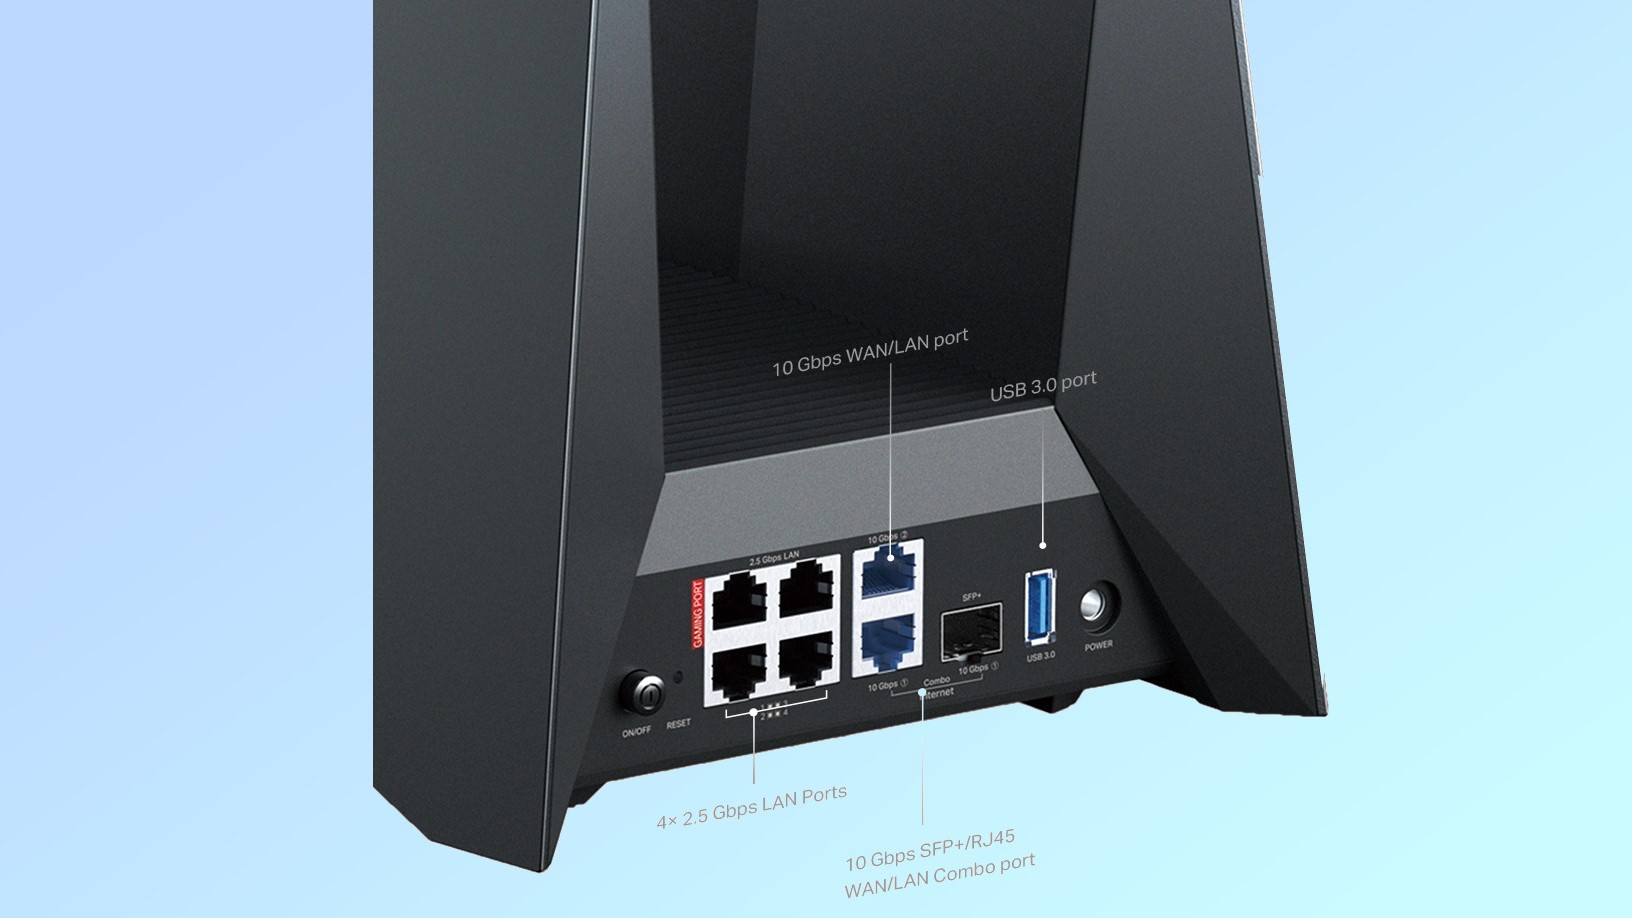 A picture showing the ports on the back of the TP-Link Archer GE800